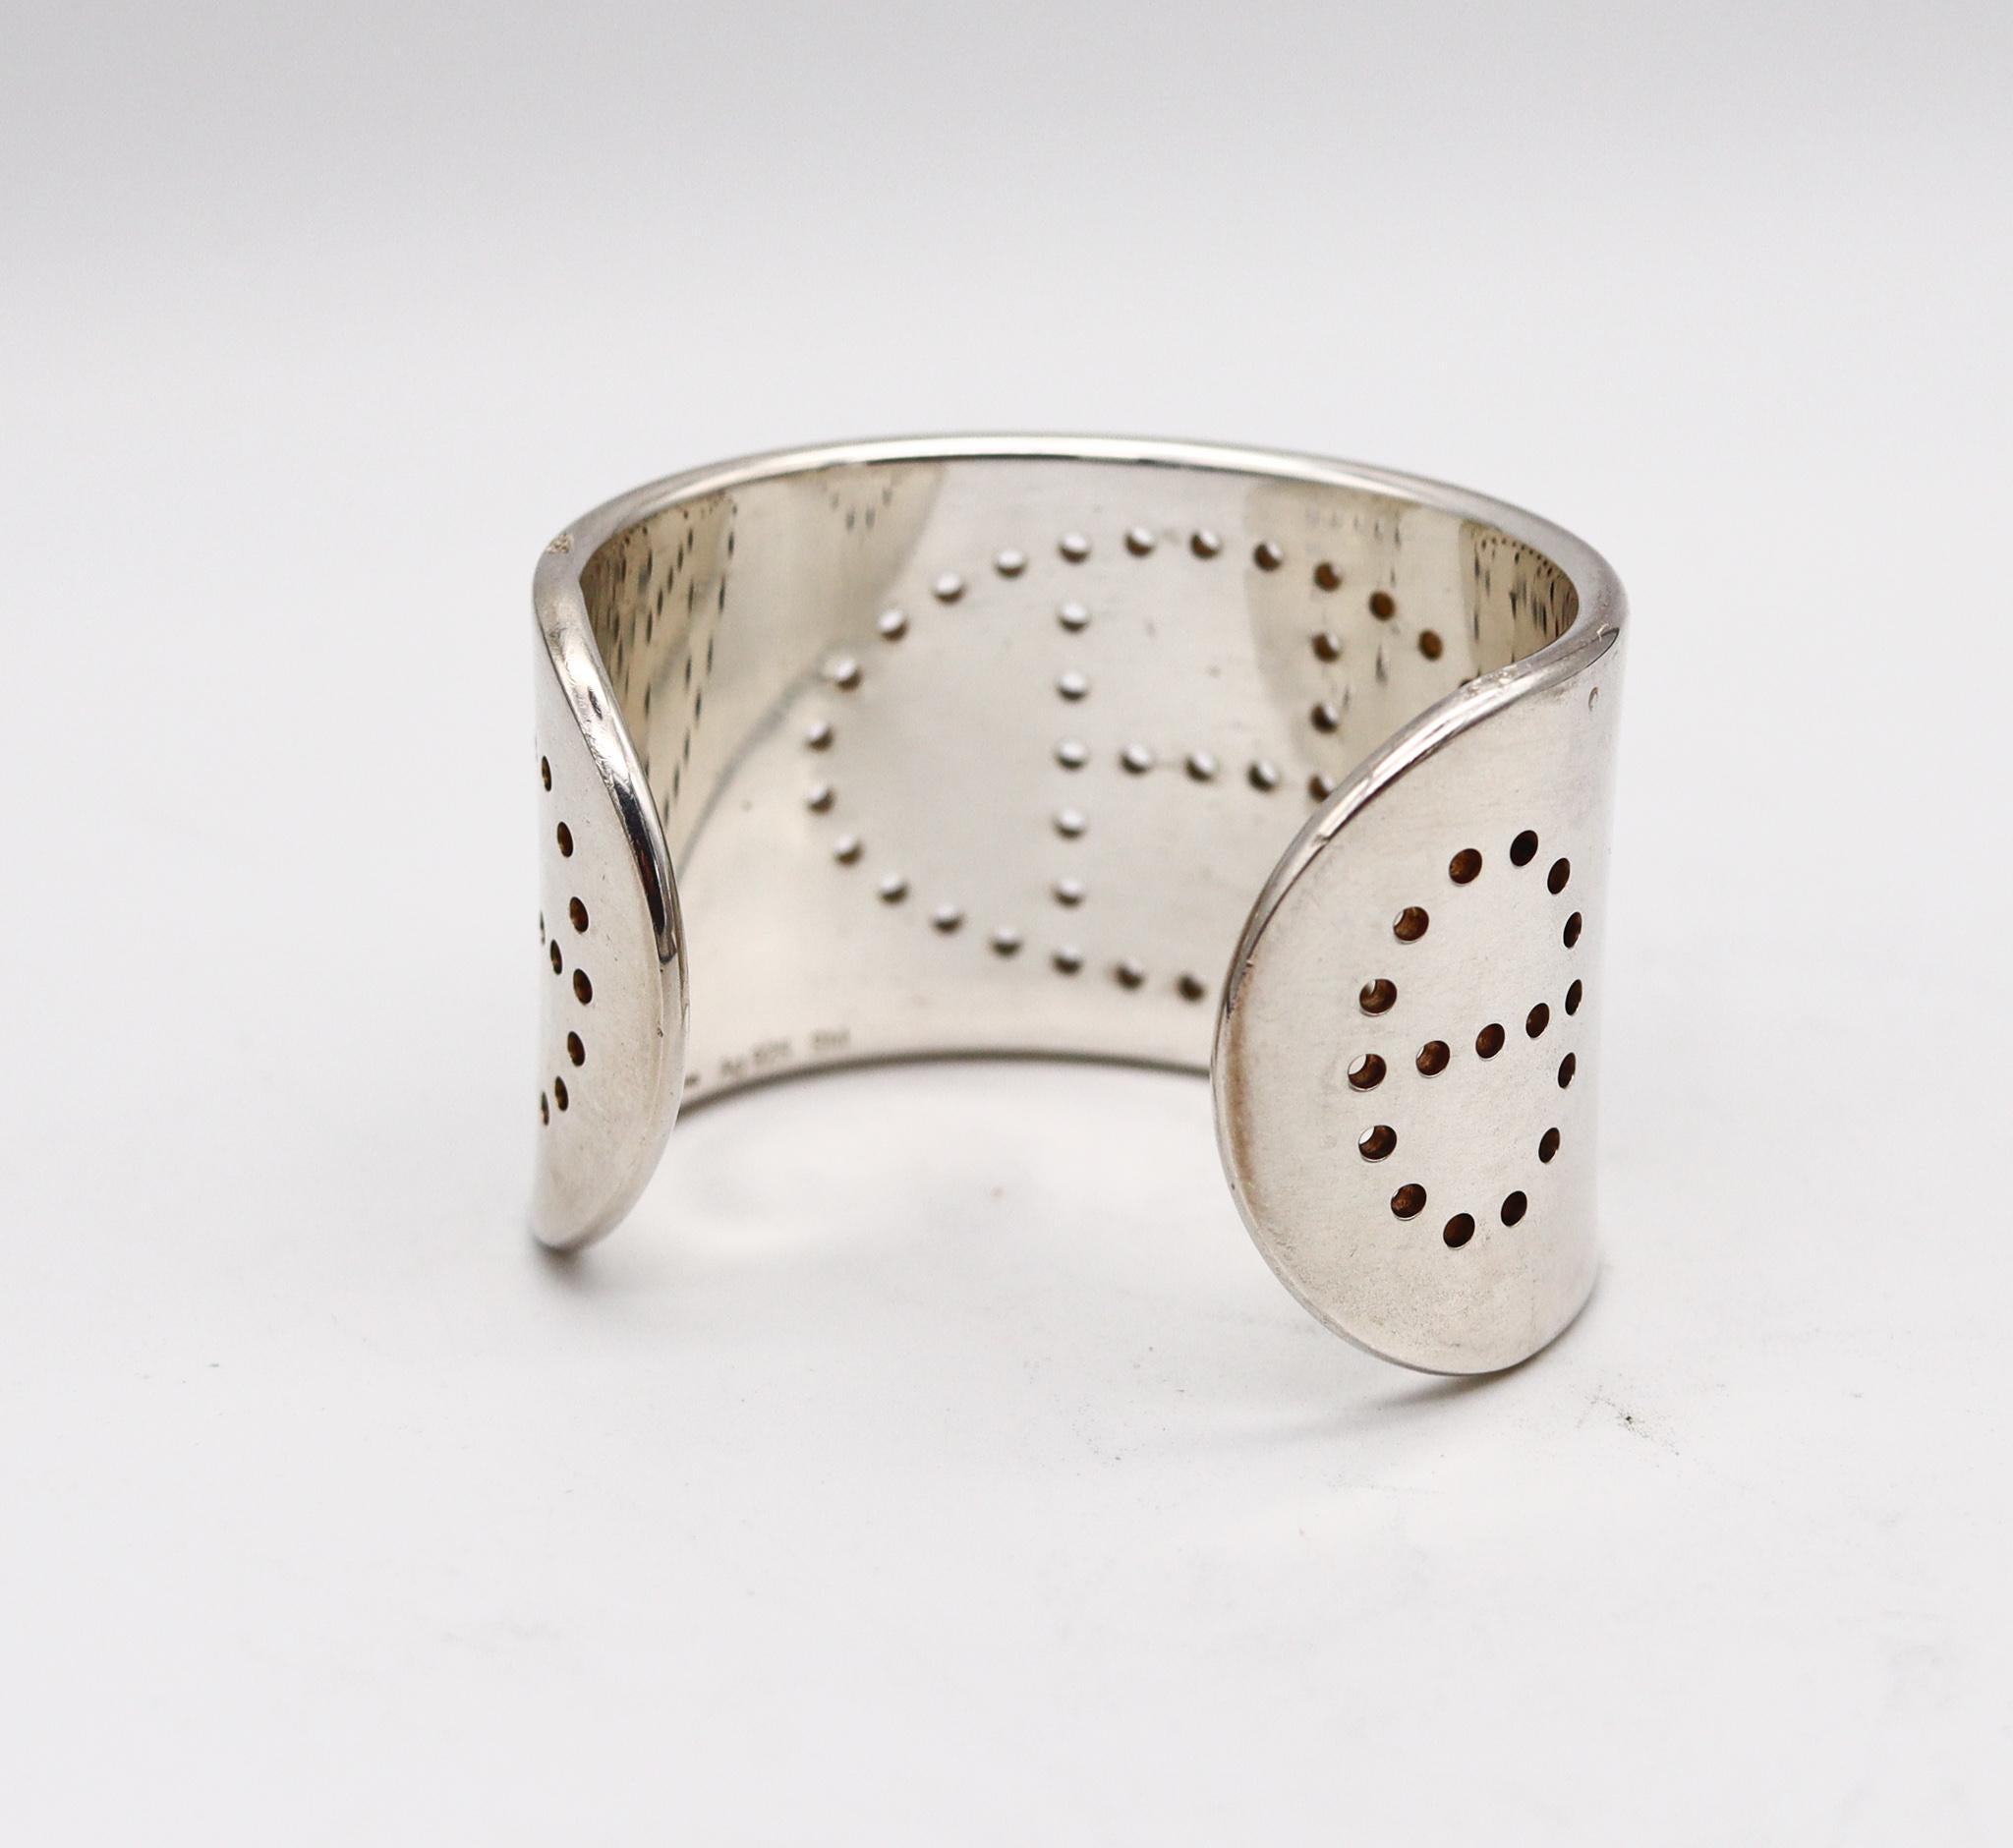 Hermès Paris Eclypse Small Cuff Bracelet in Solid .925 Sterling Silver In Excellent Condition For Sale In Miami, FL